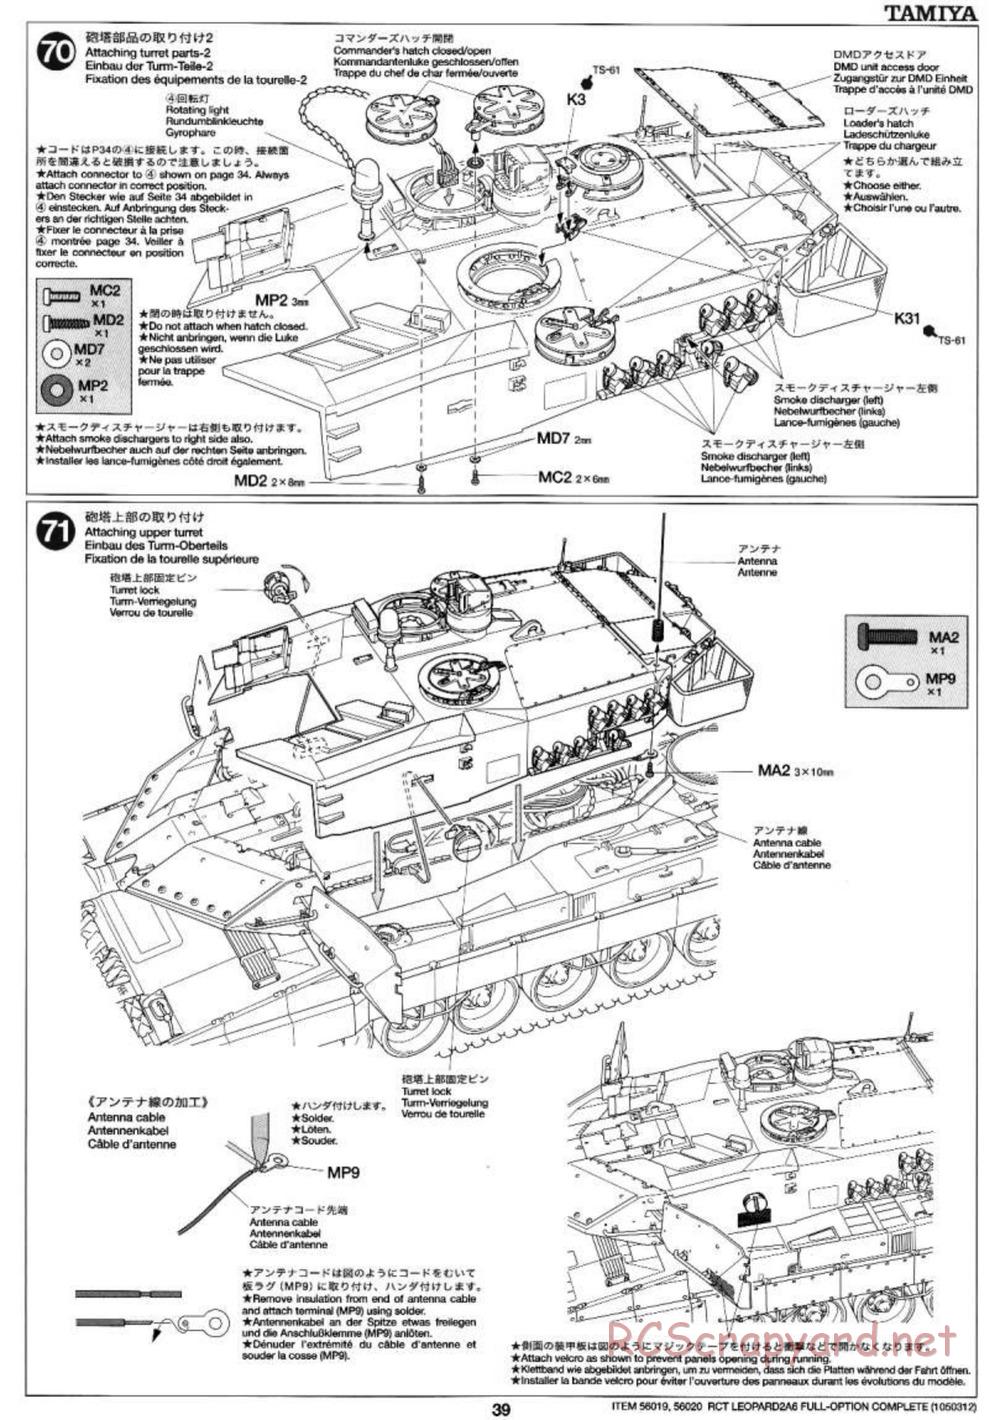 Tamiya - Leopard 2 A6 - 1/16 Scale Chassis - Manual - Page 39